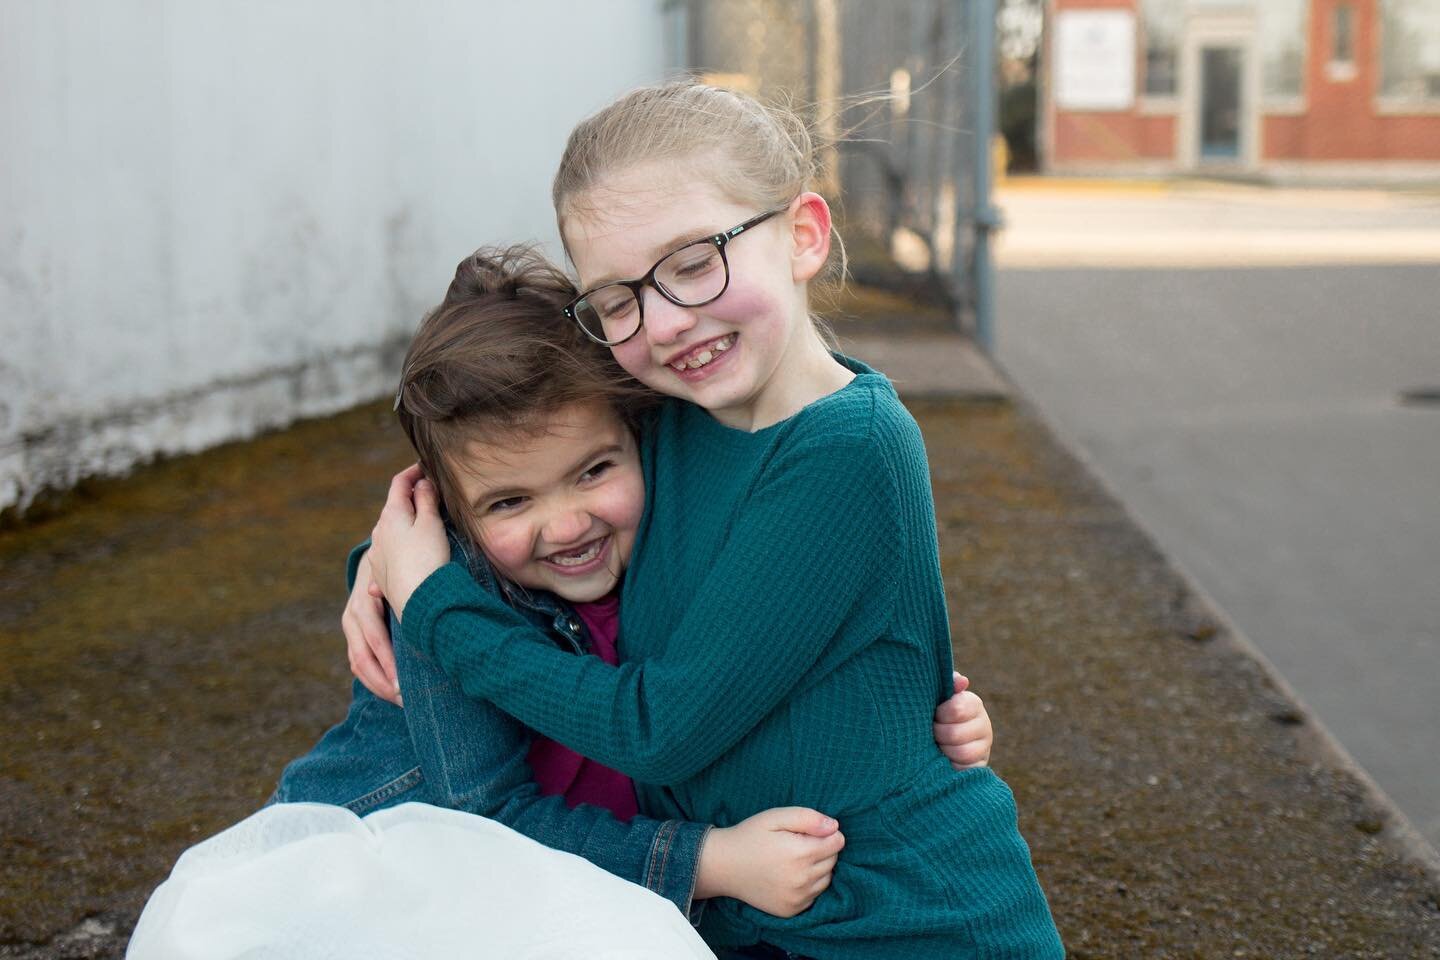 💛Sisters💛
Don&rsquo;t wait to take photos of your littles! It&rsquo;s precious ones like this you&rsquo;ll cherish forever.

#independenceoregon #monmouthoregon #monmouthphotographer #independencephotographer #familyphotography #siblinglove #dallas